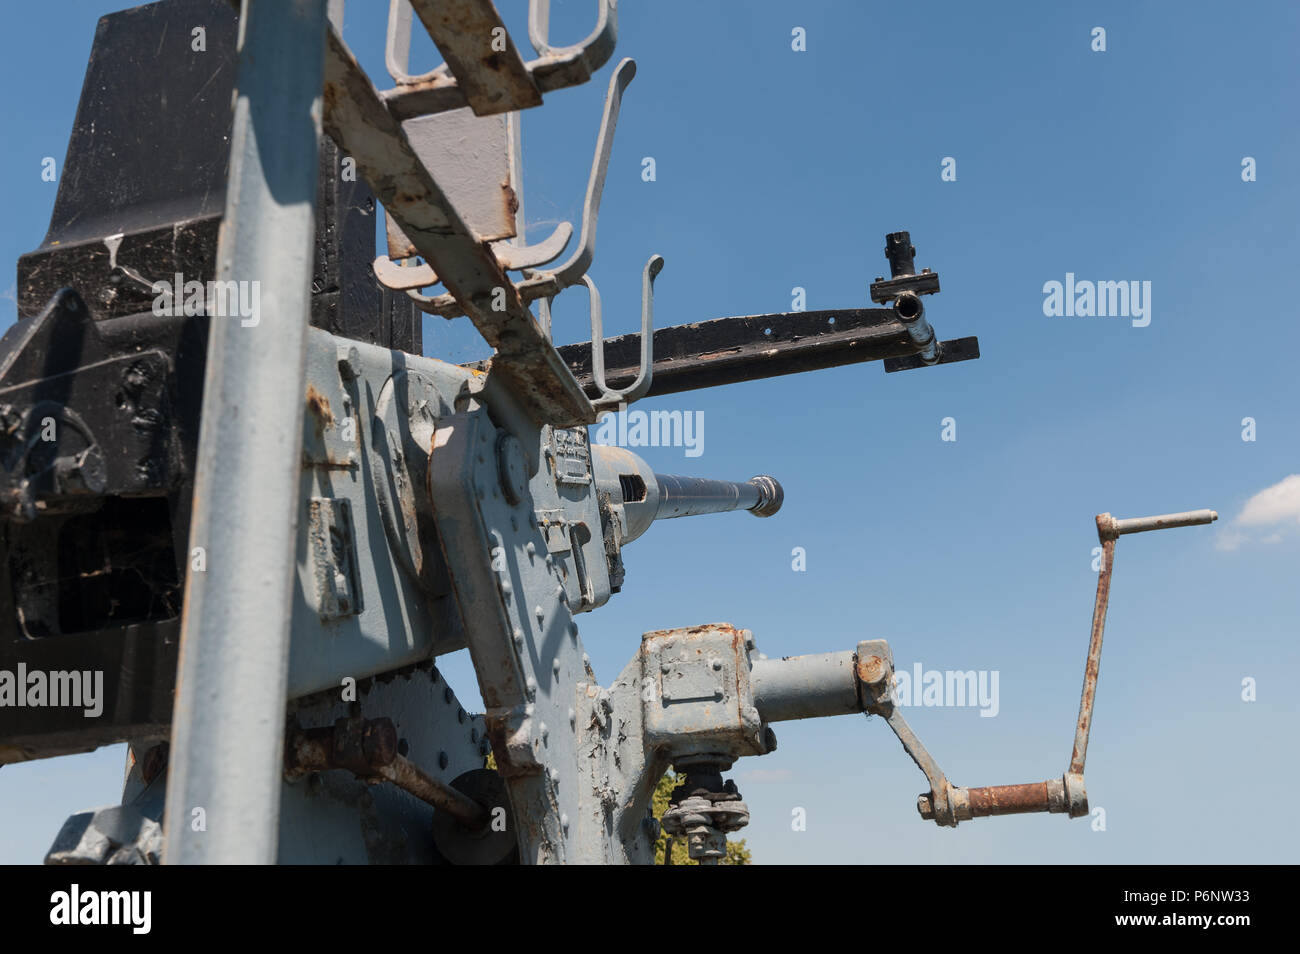 Second World War Bofors 40 mm anti-aircraft gun pointing towards a blue sky used for air defences Stock Photo